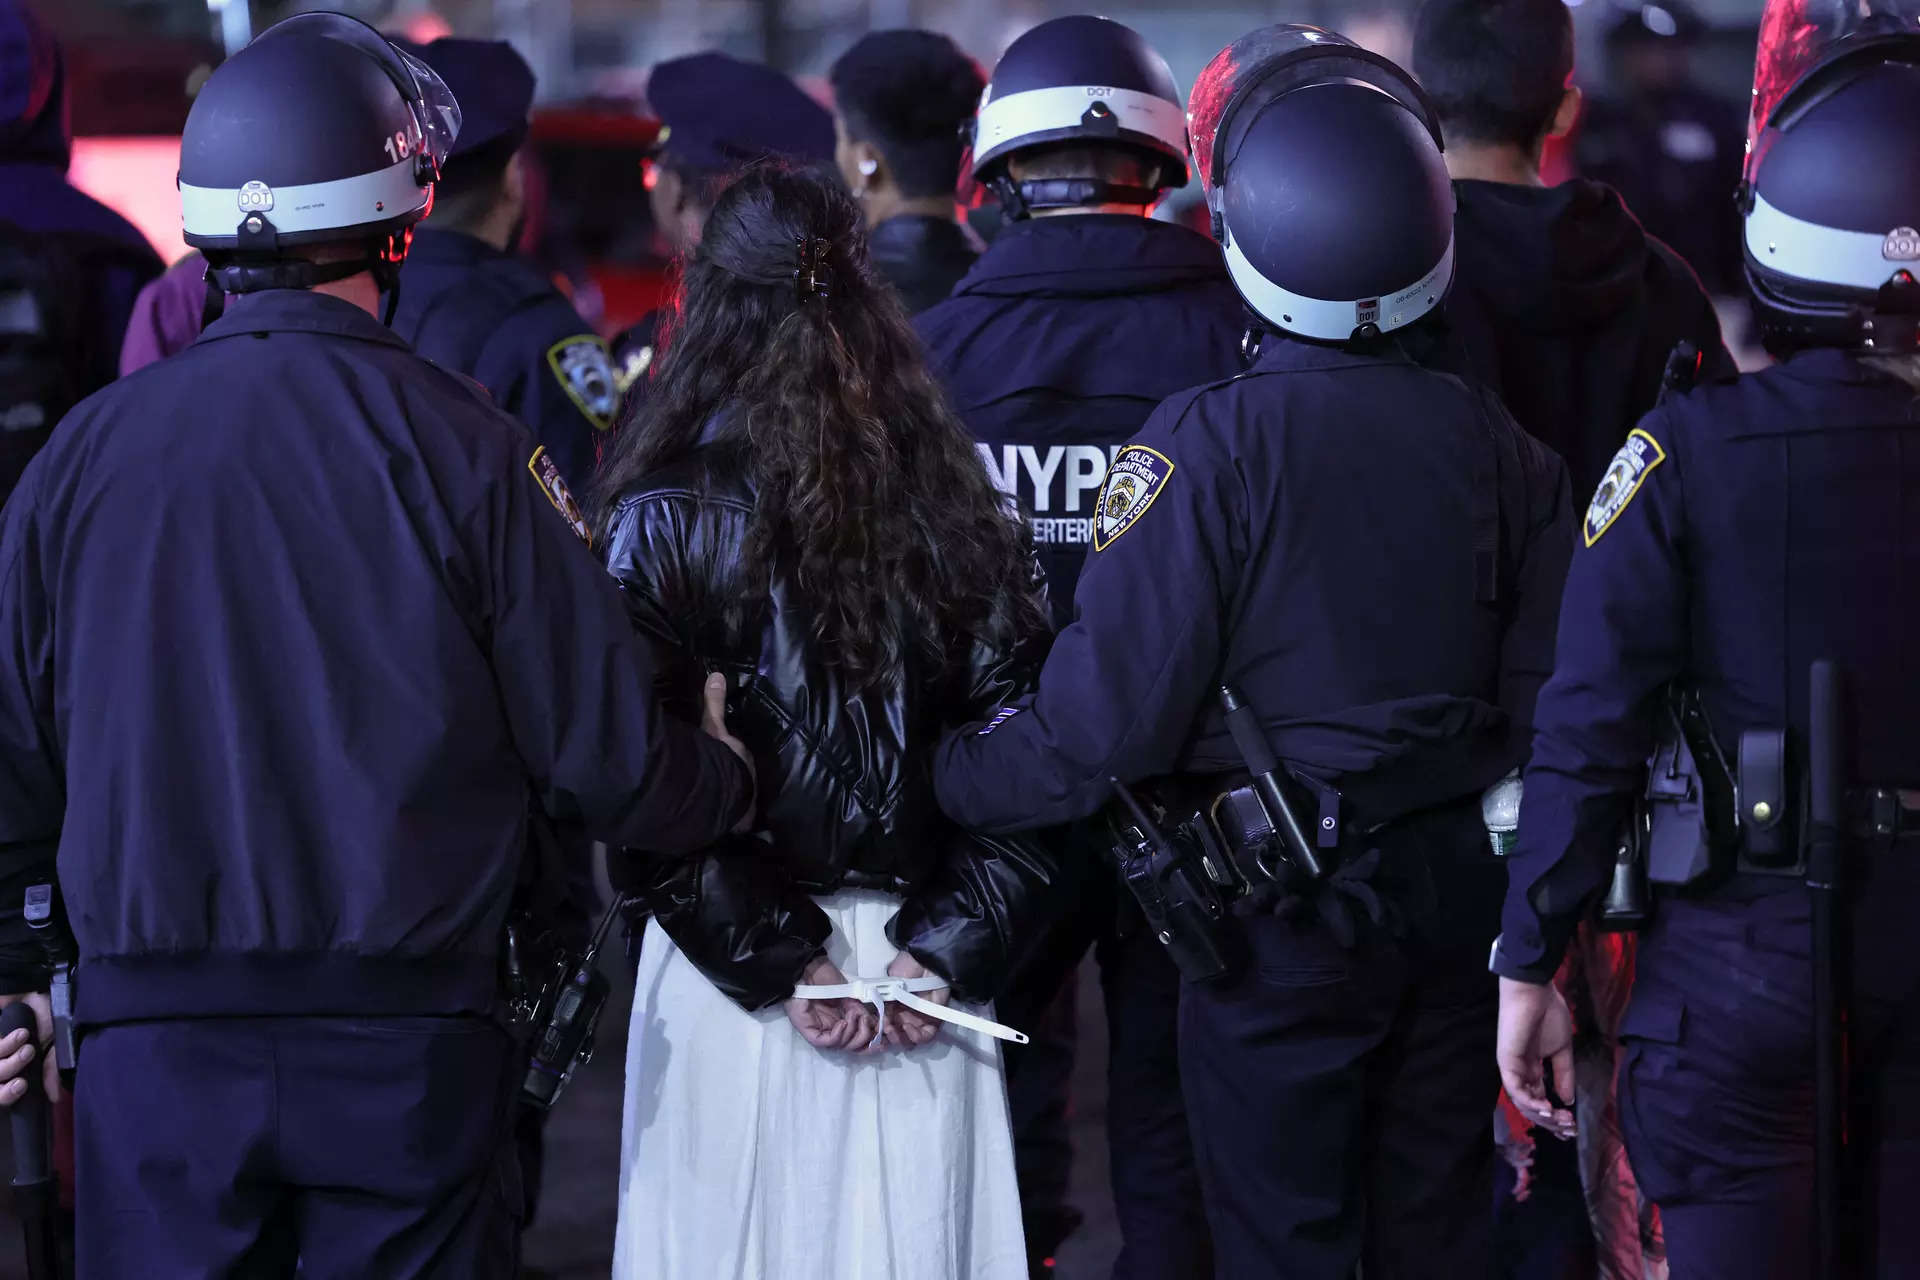 NYPD cops raid Columbia University, arrest students: What we know so far